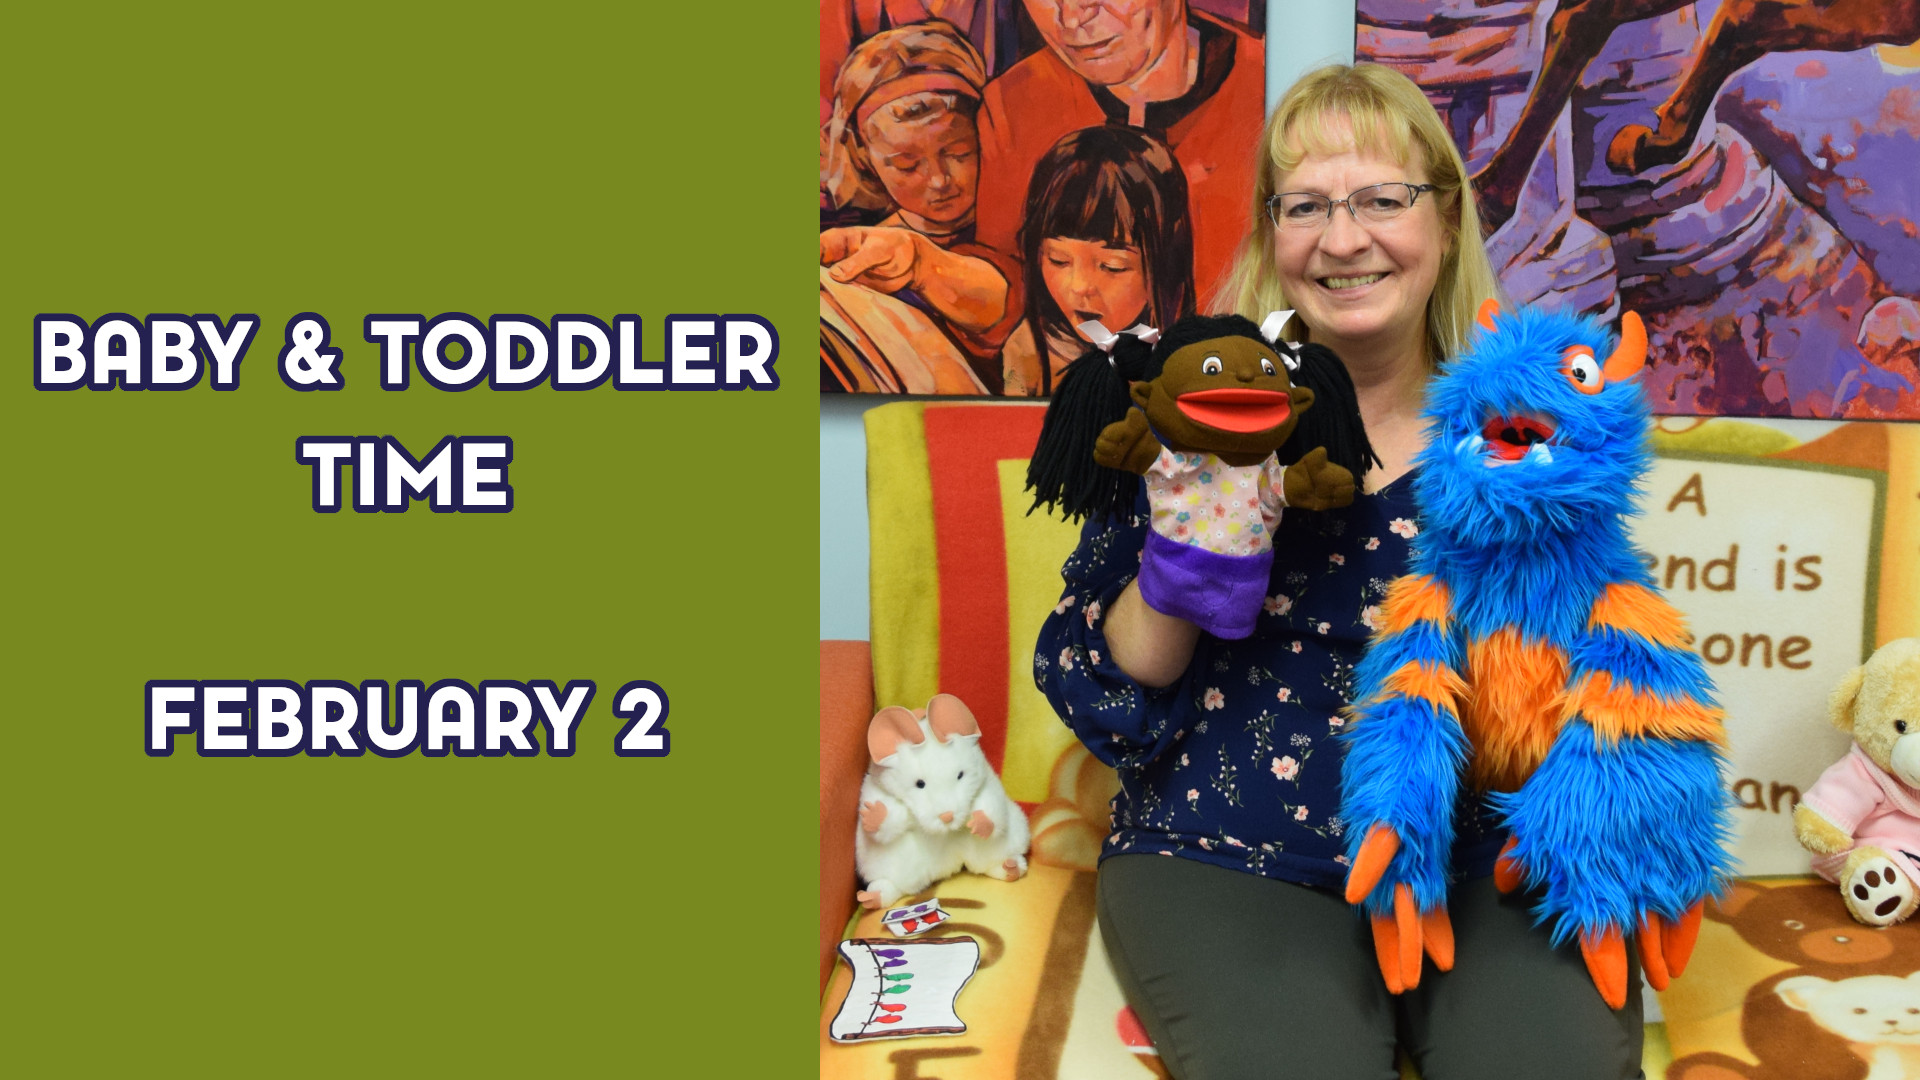 A woman holds puppets next to the text "Baby and Toddler Time February 2"